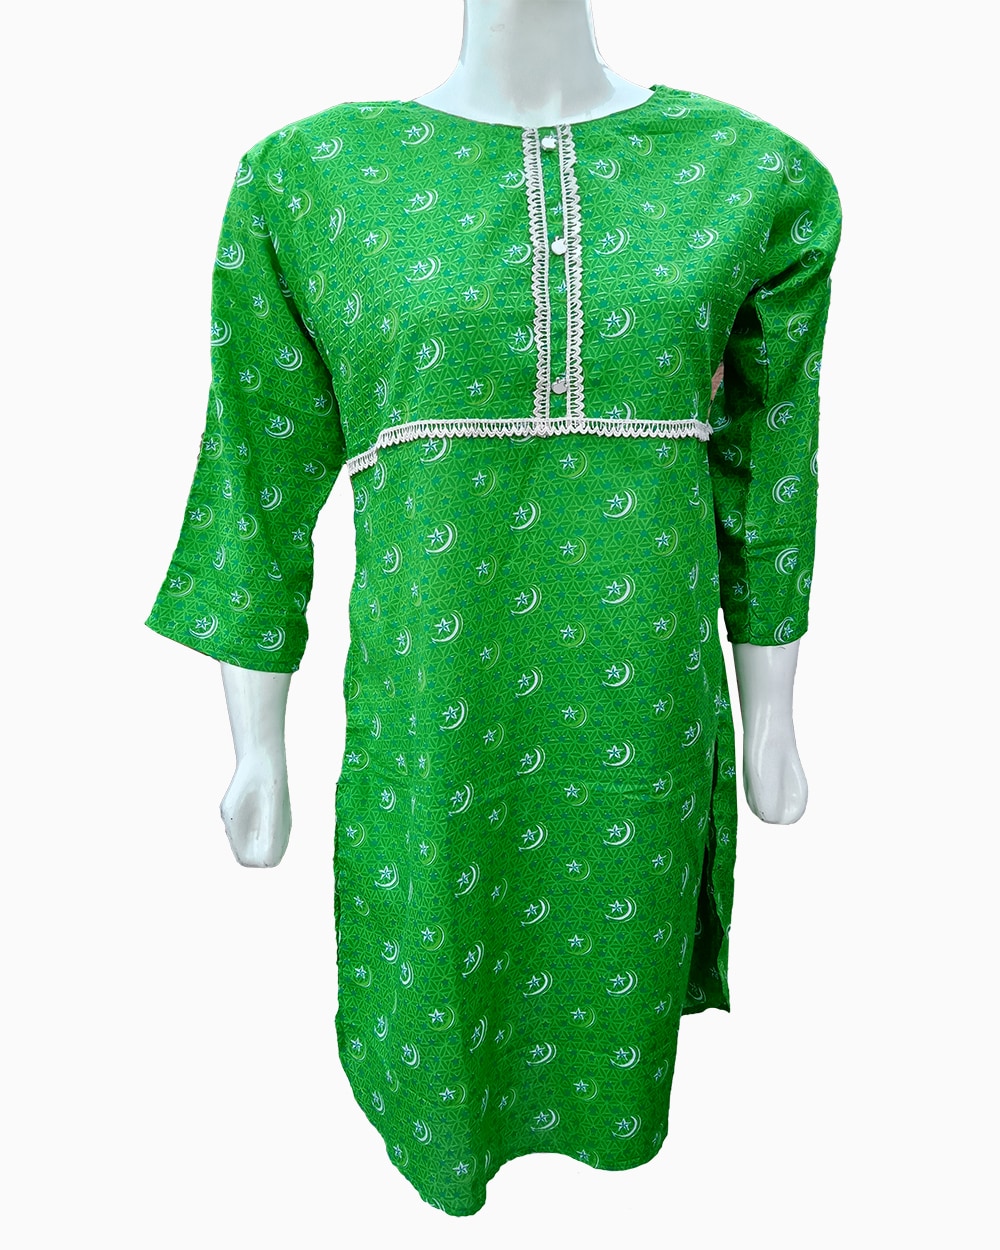 independence day green kurti online - 1